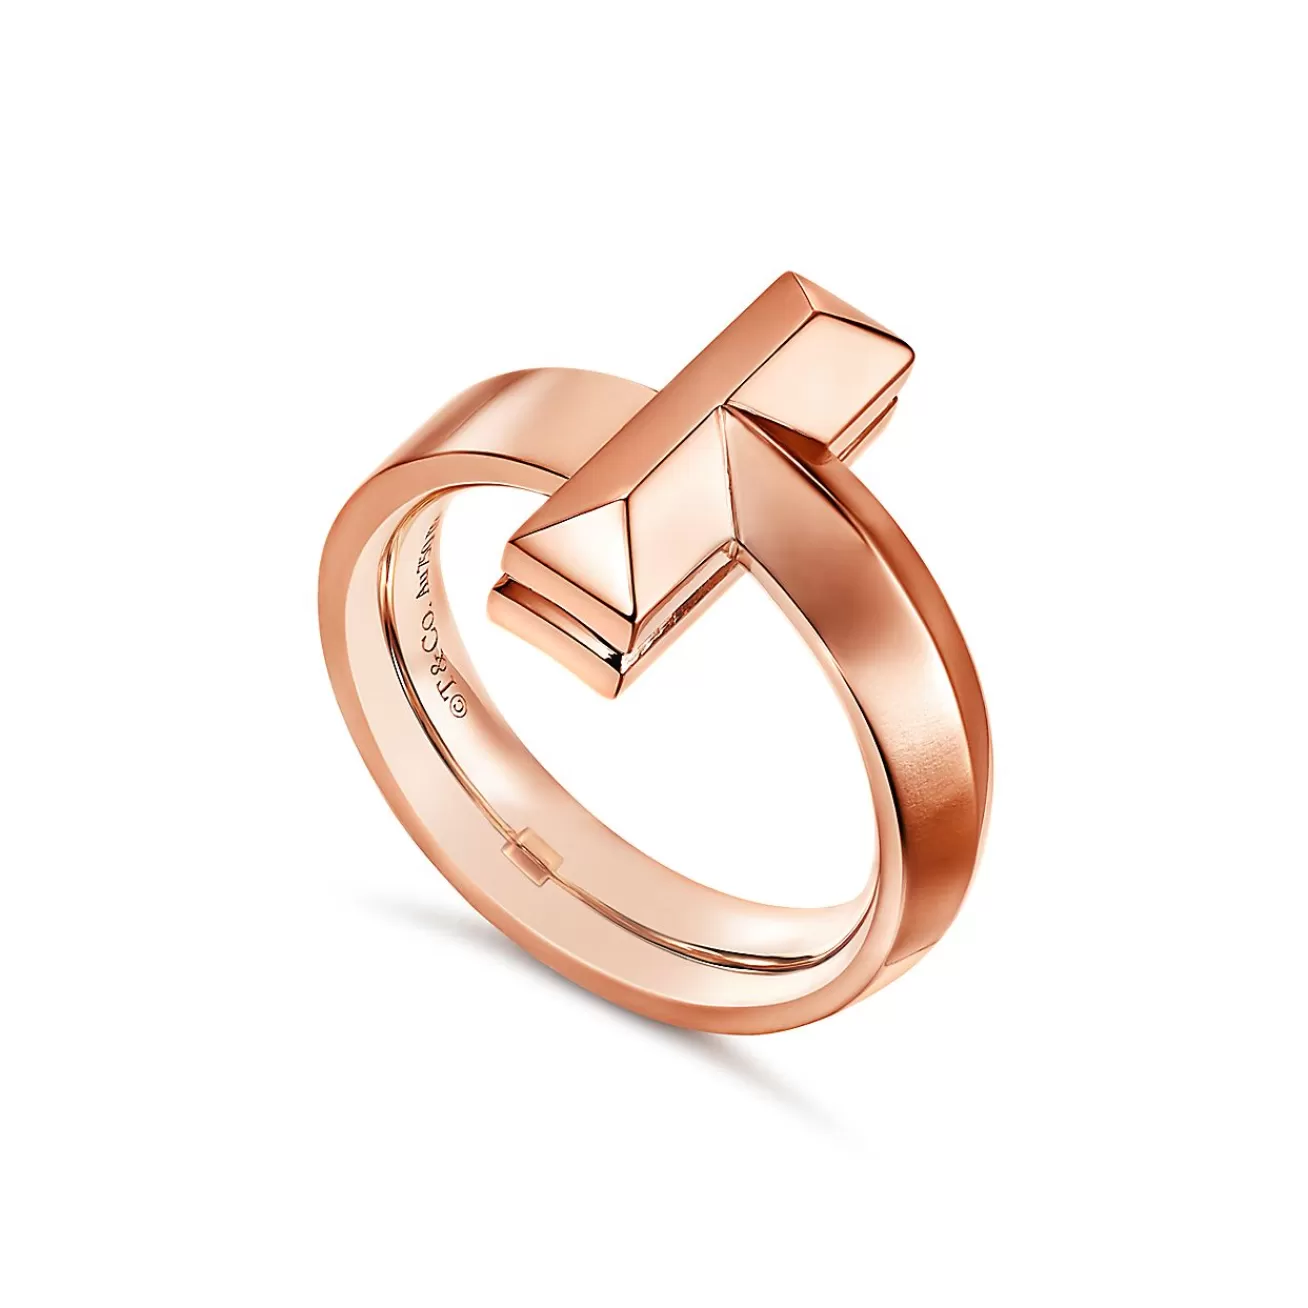 Tiffany & Co. Tiffany T T1 Ring in Rose Gold, 4.5 mm | ^ Rings | Men's Jewelry